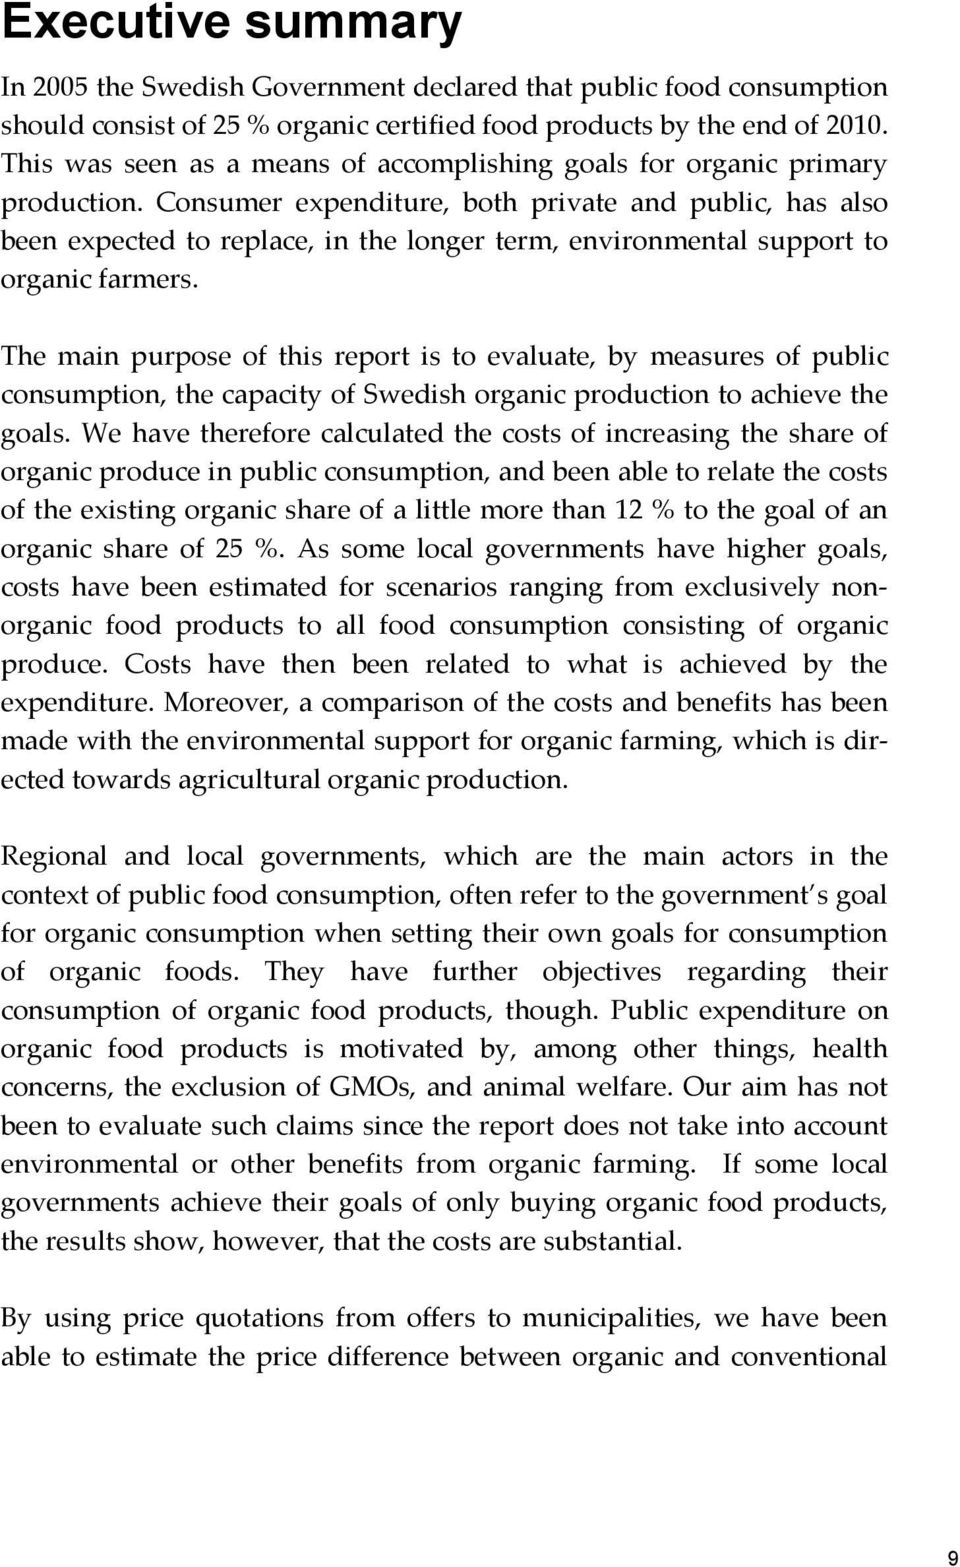 Consumer expenditure, both private and public, has also been expected to replace, in the longer term, environmental support to organic farmers.